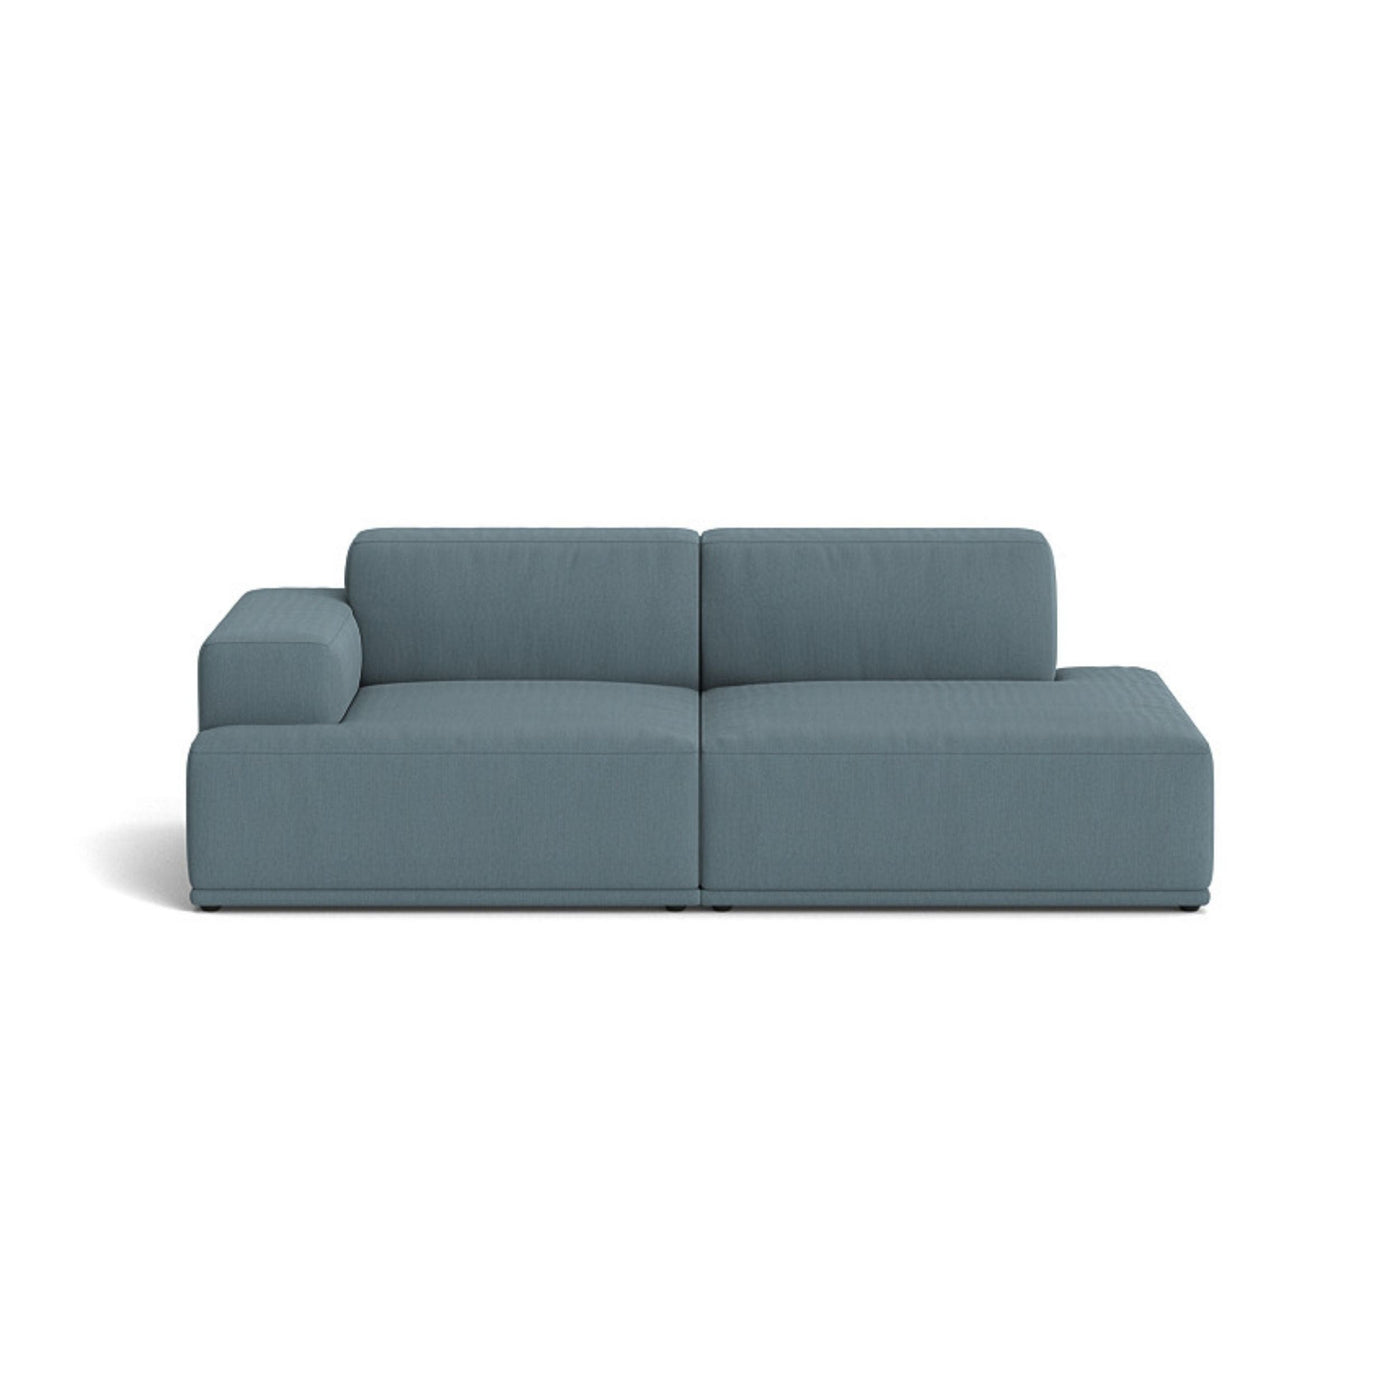 Muuto Connect Soft Modular 2 Seater Sofa, configuration 2. made-to-order from someday designs. #colour_re-wool-768